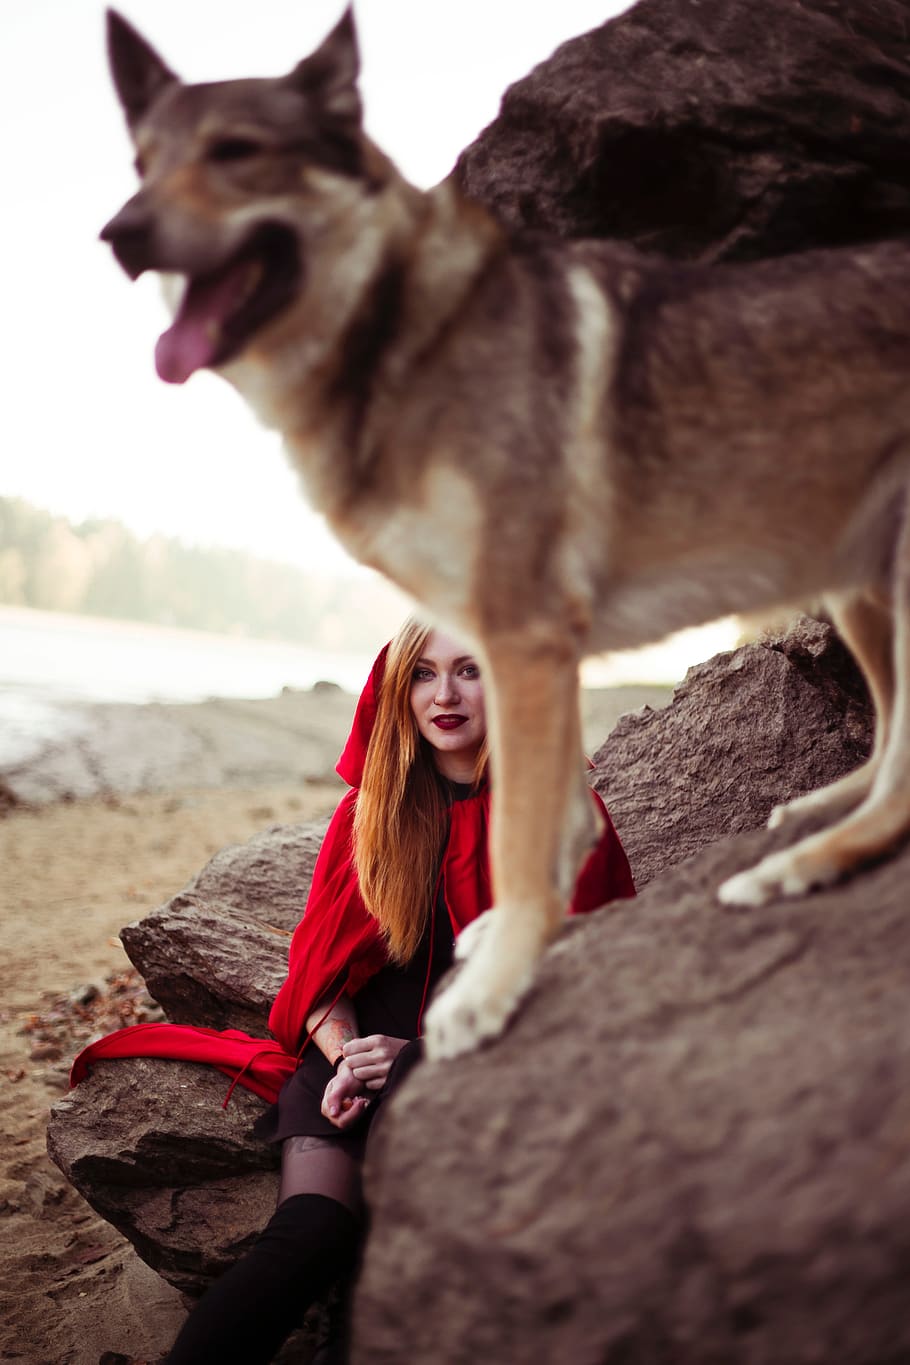 wolf, riding hood, girl, forest, story, red, animal, trees, old, antique